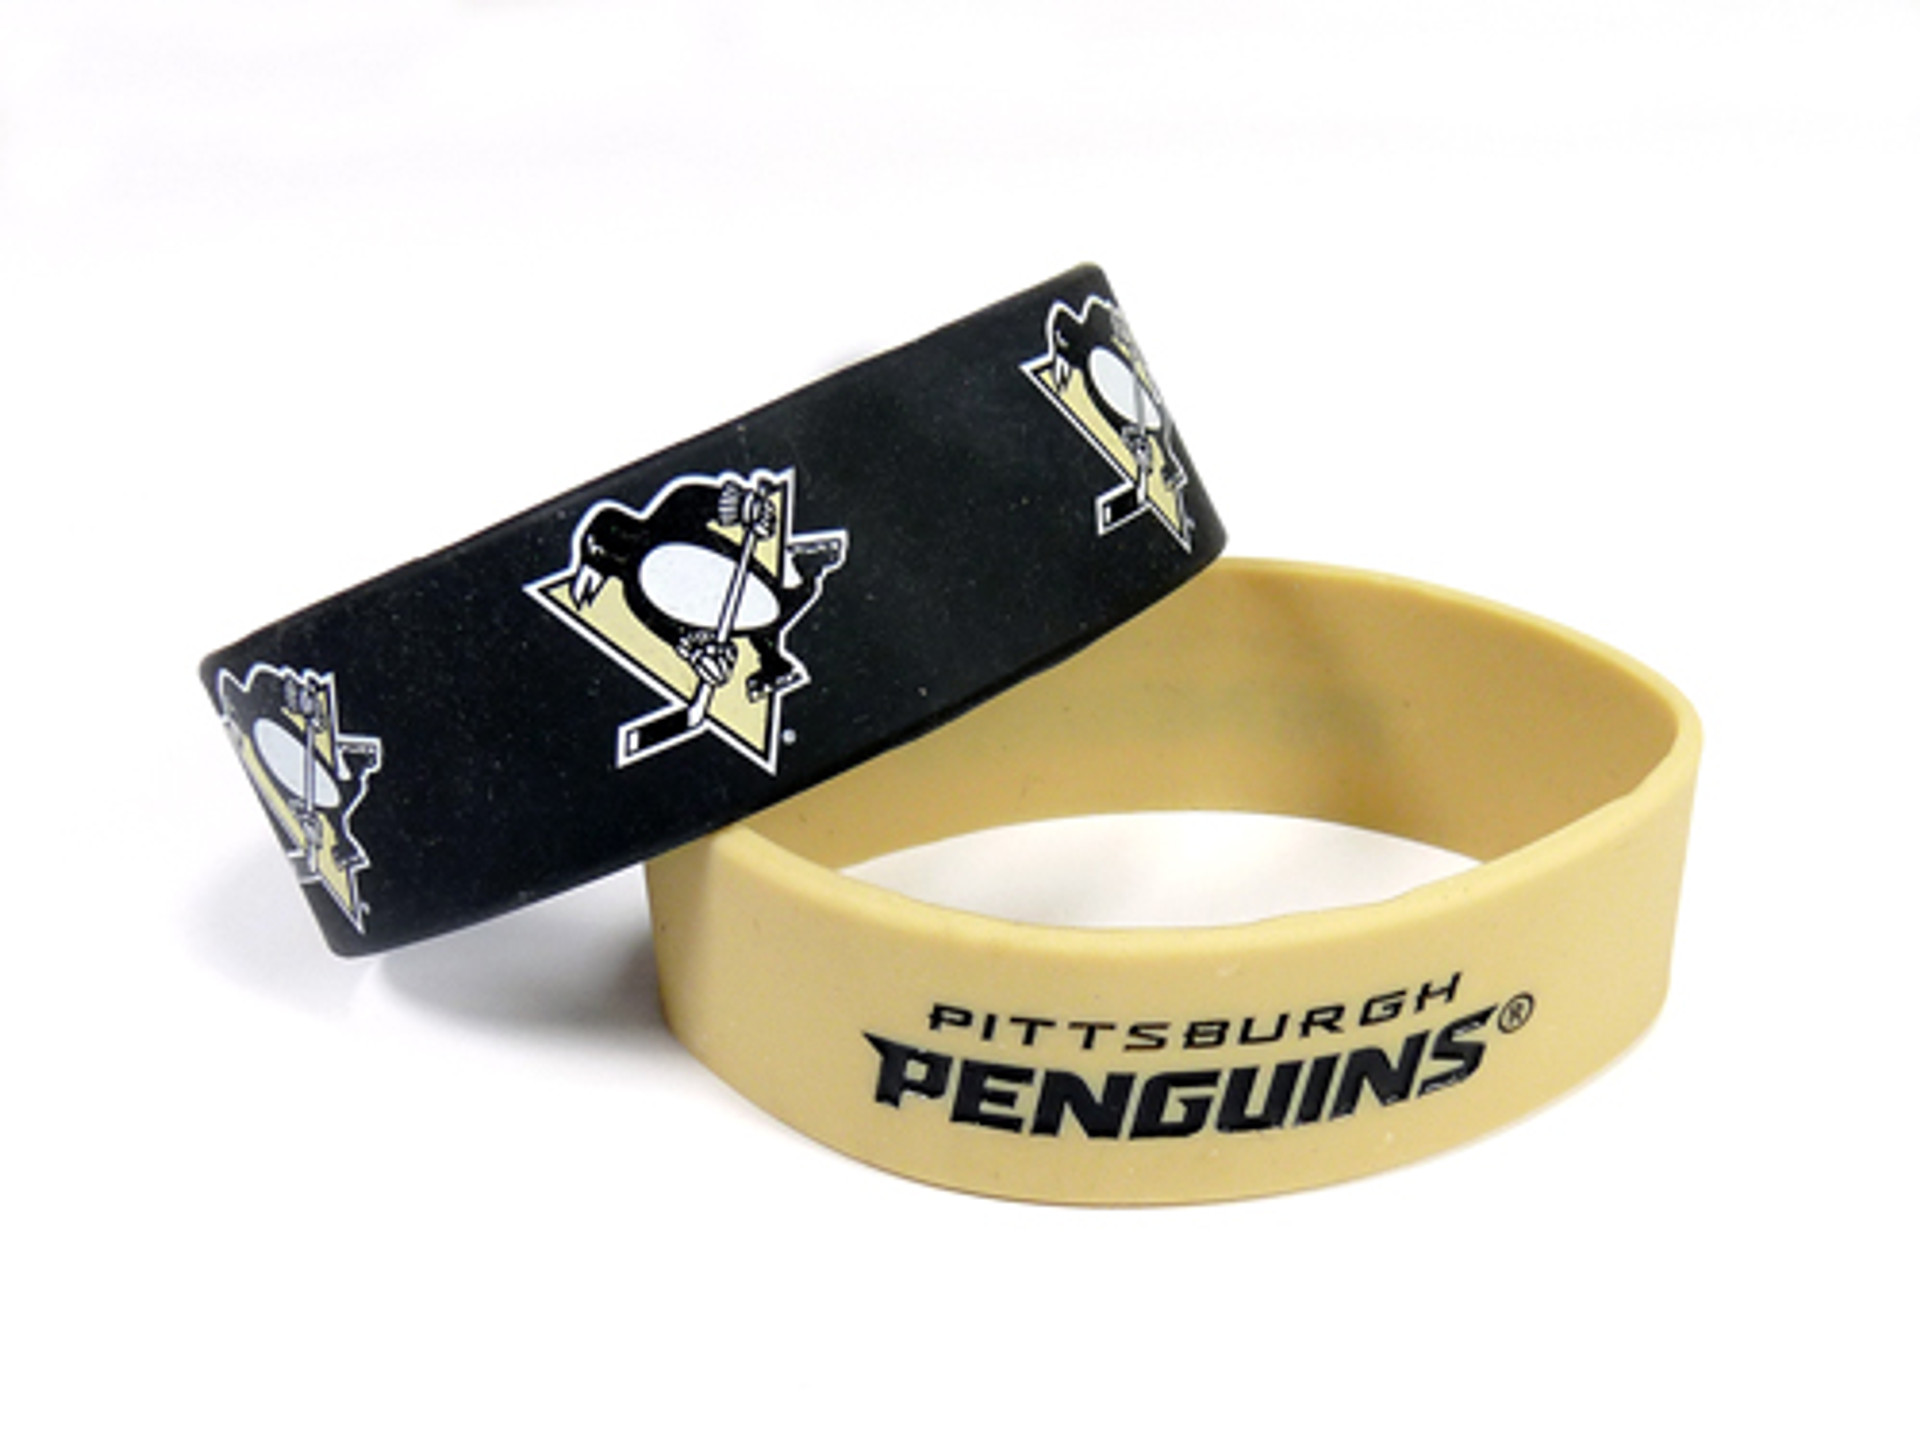 Pittsburgh Penguins Wide Wristbands (2 Pack)